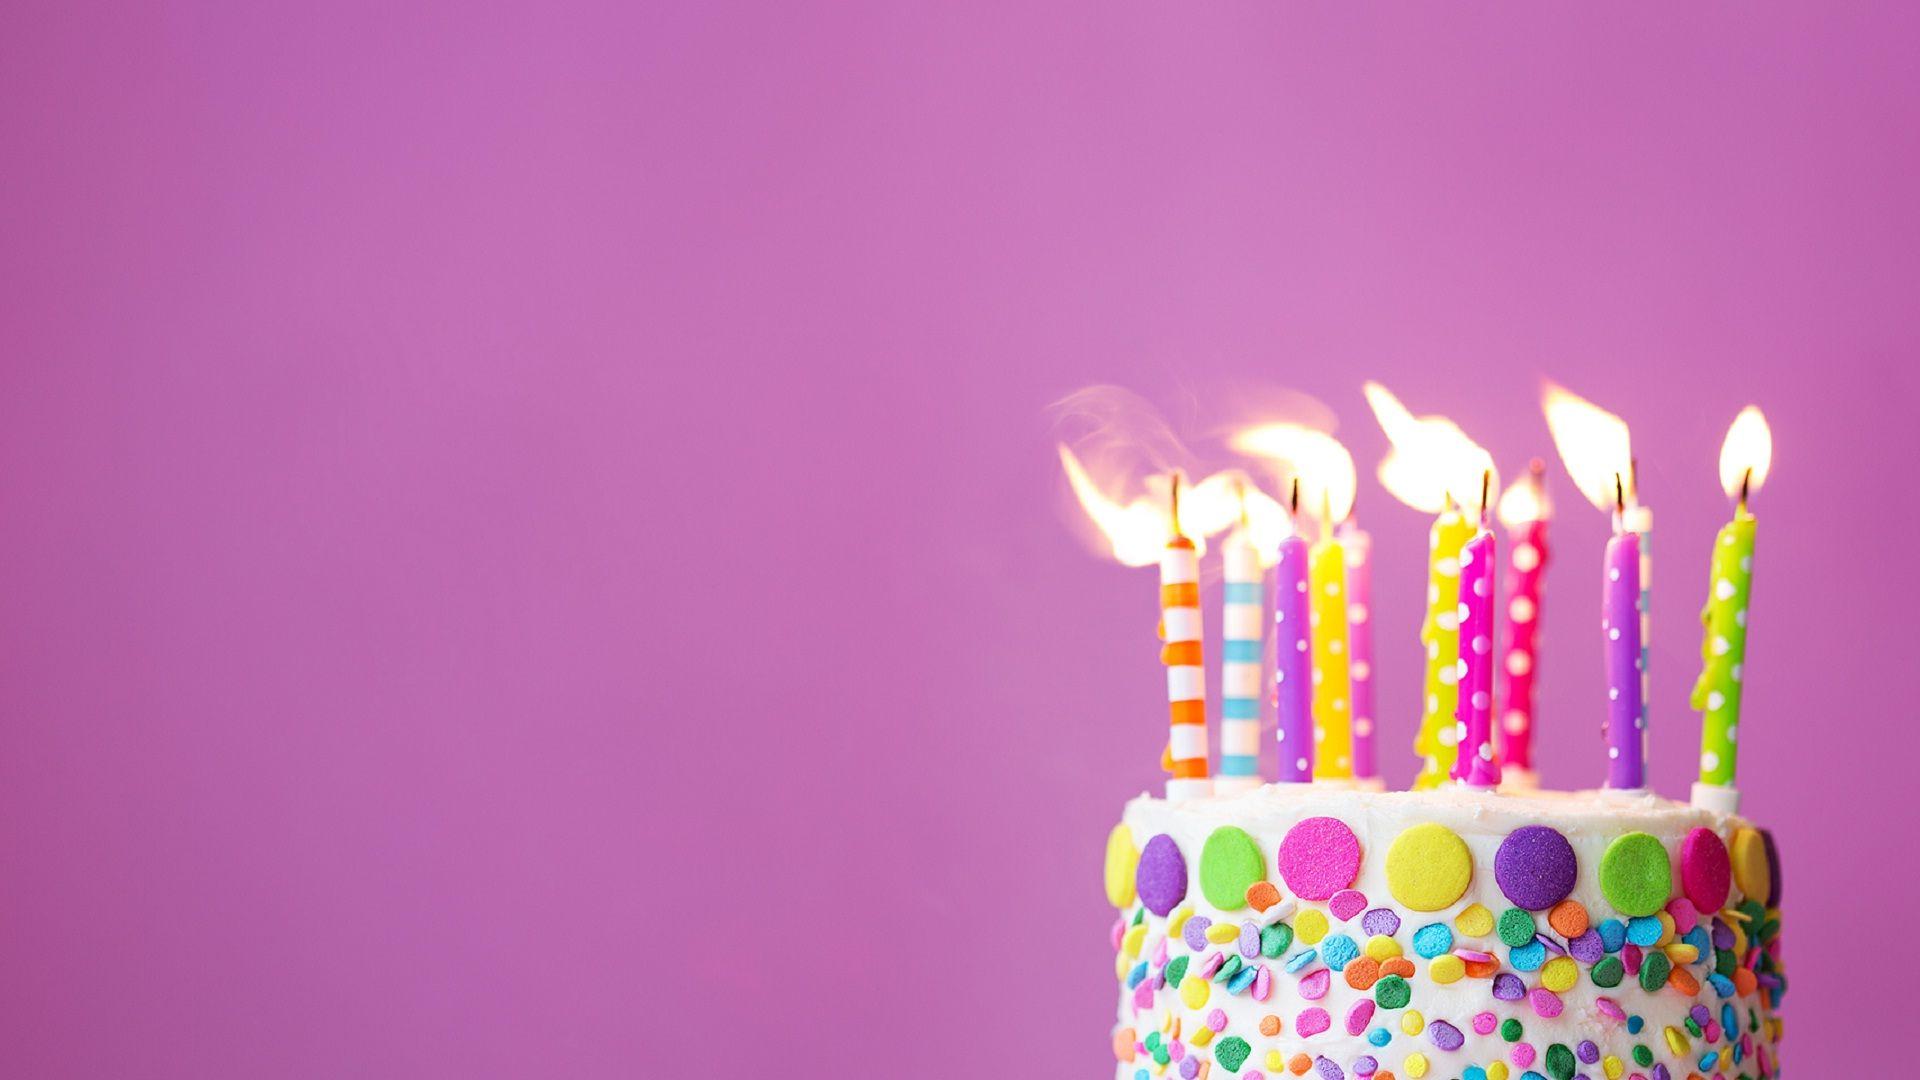 Happy birthday cake and candle lights on it wallpaper. HD